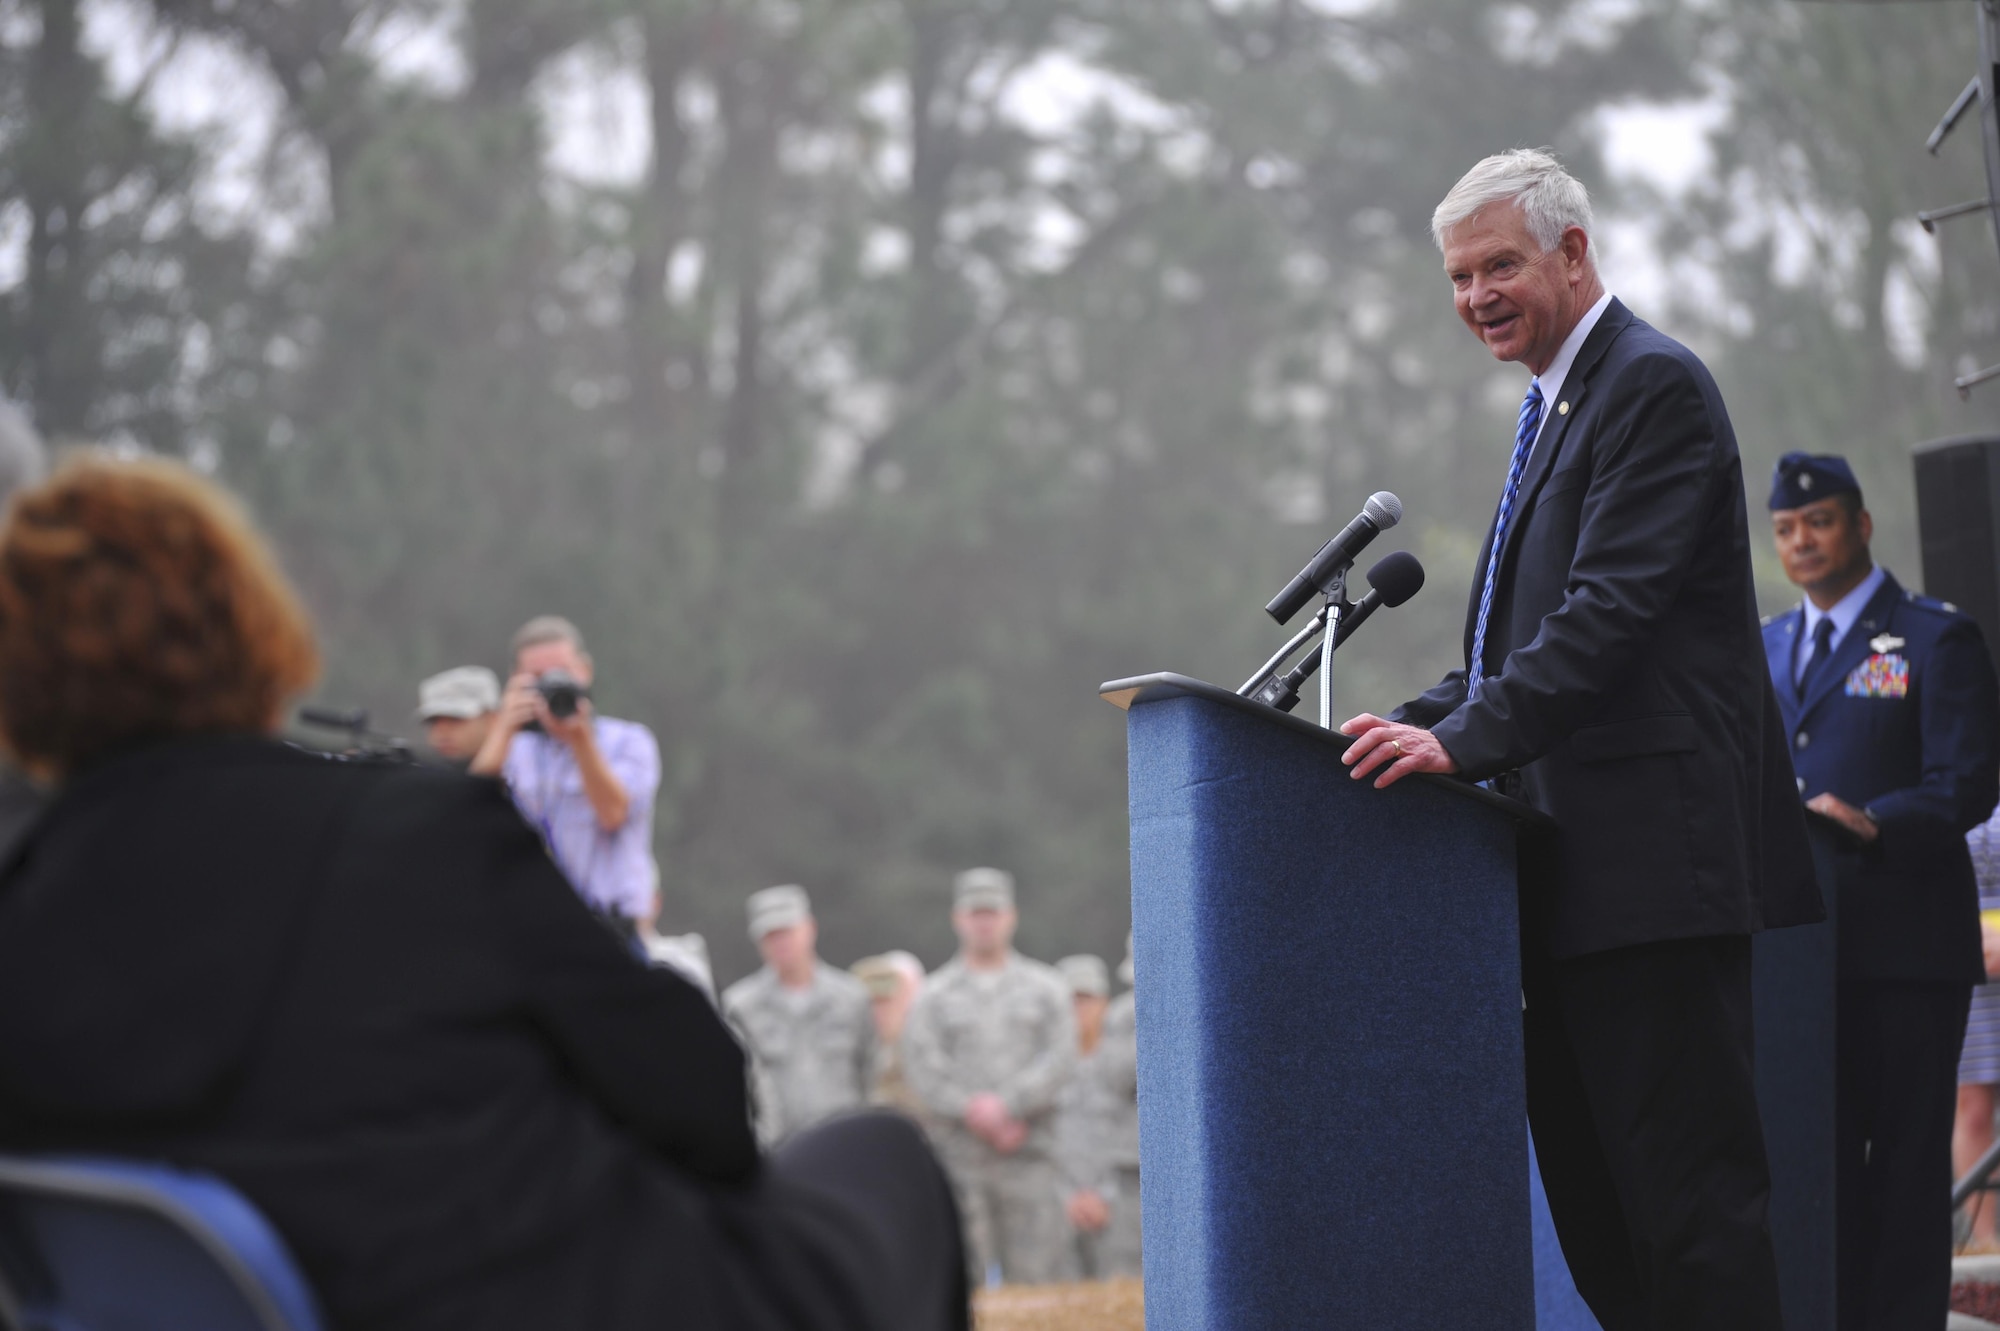 Retired Gen. Charles Holland, former commander of U.S. Special Operations Command and Air Force Special Operations Command, speaks during an AC-130H Spectre dedication ceremony February 2, 2016, at Hurlburt Field, Fl. More than 400 people attended the dedication ceremonies for the AC-130H Spectre and MC-130P Combat Shadow to honor the legacy of these aircraft at the air park. As the aircraft retire, the Air Force and Air Force Special Operations Command modernize the fleet with the AC-130J Ghostrider and MC-130J Commando II. (U.S. Air Force photo by Airman 1st Class Joseph Pick)